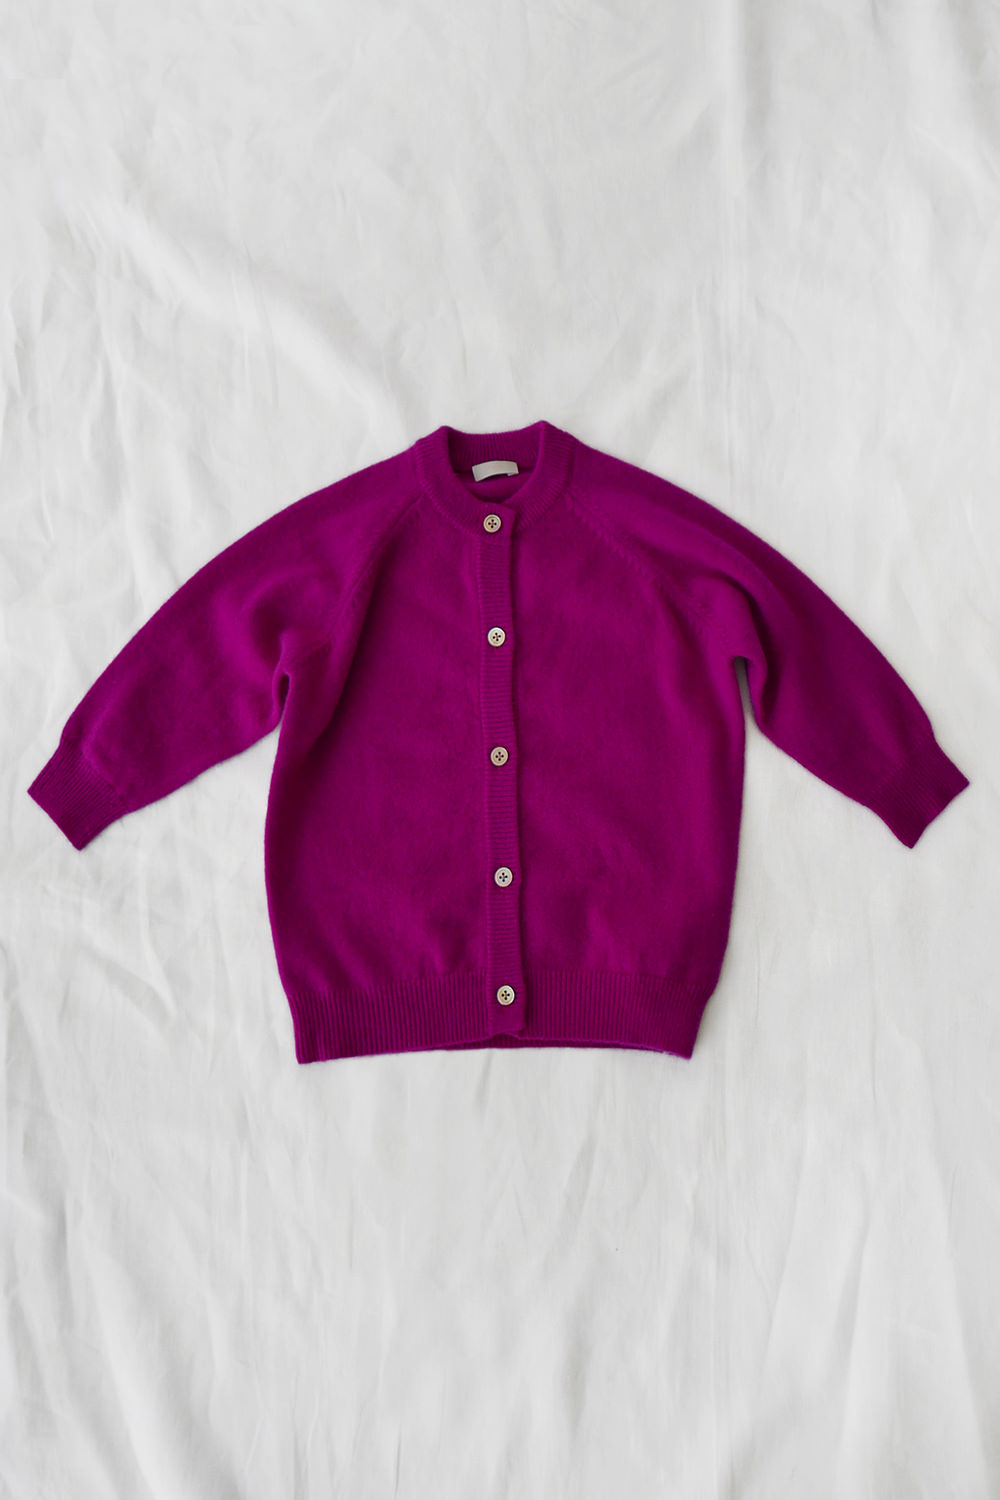 makie wool cashmere cardigan violet top picture